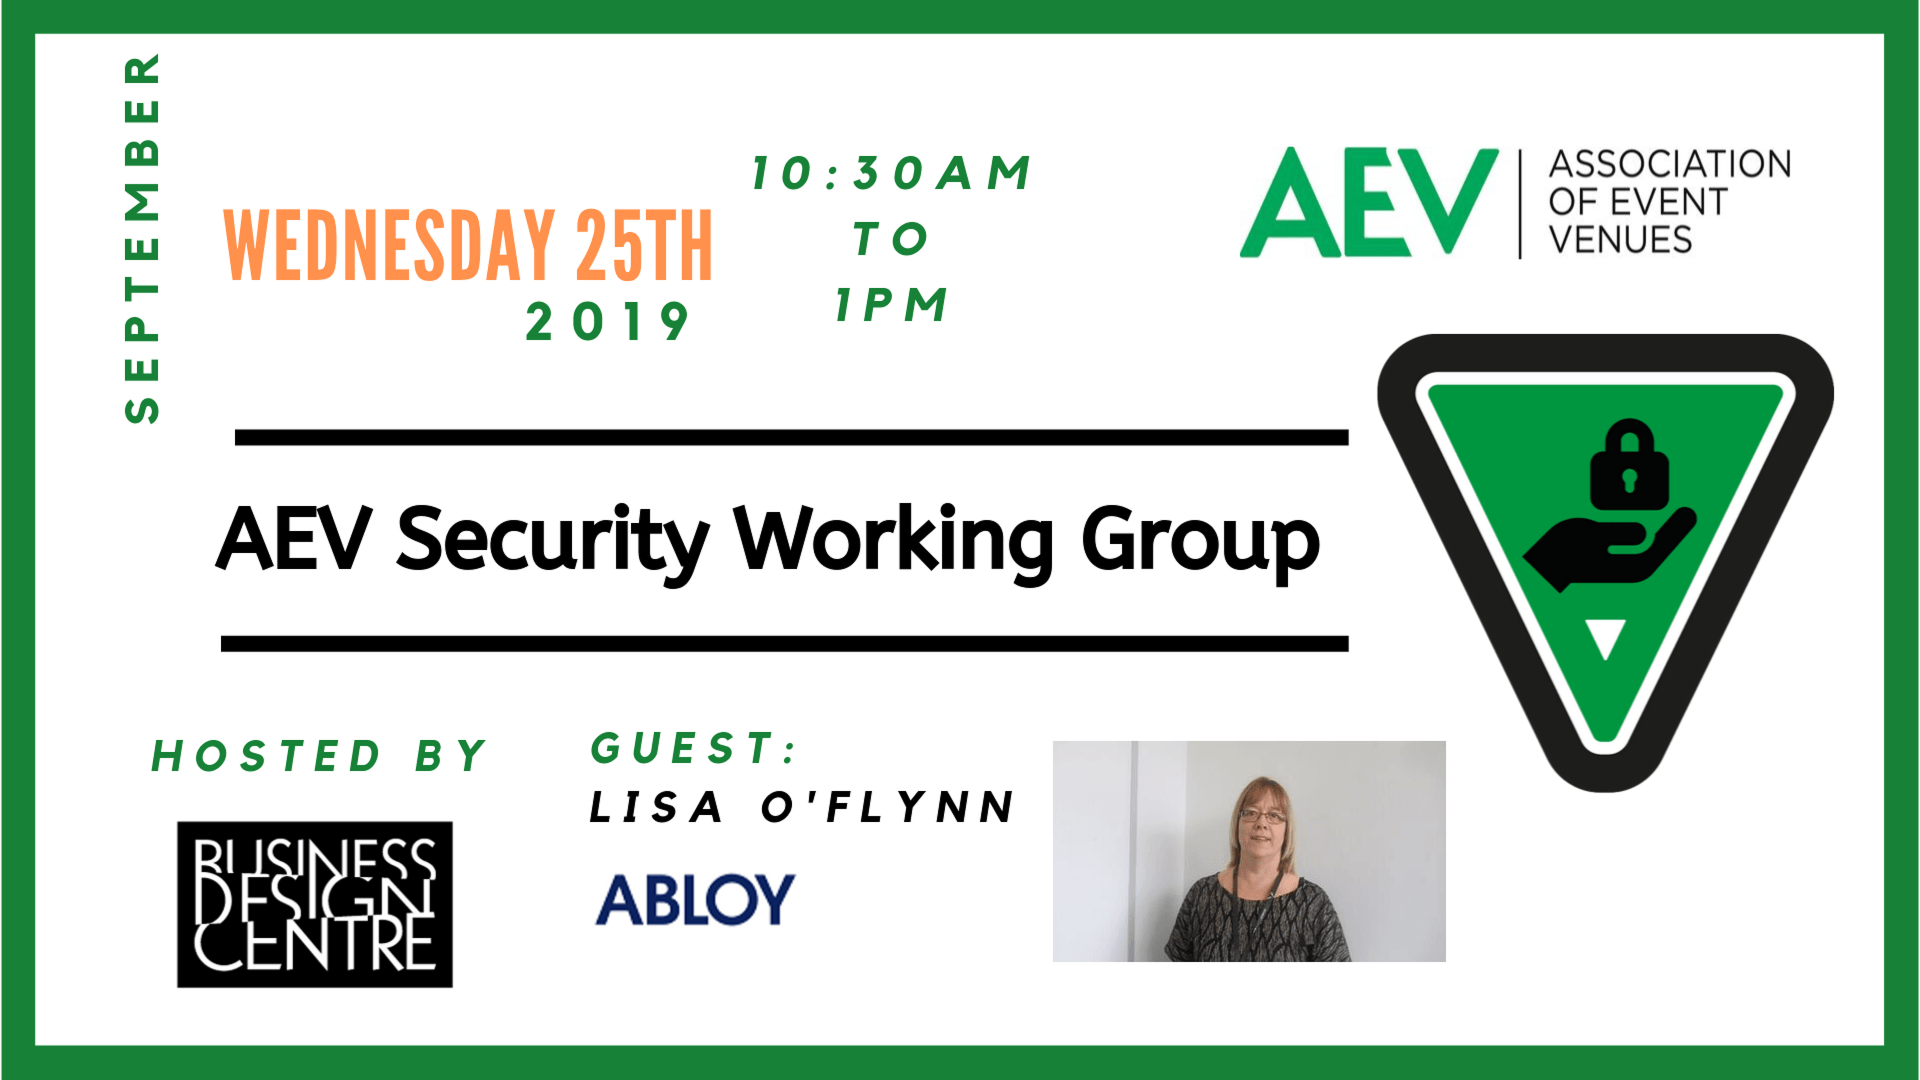 AEV Security Working Group to meet at BDC on 25th September